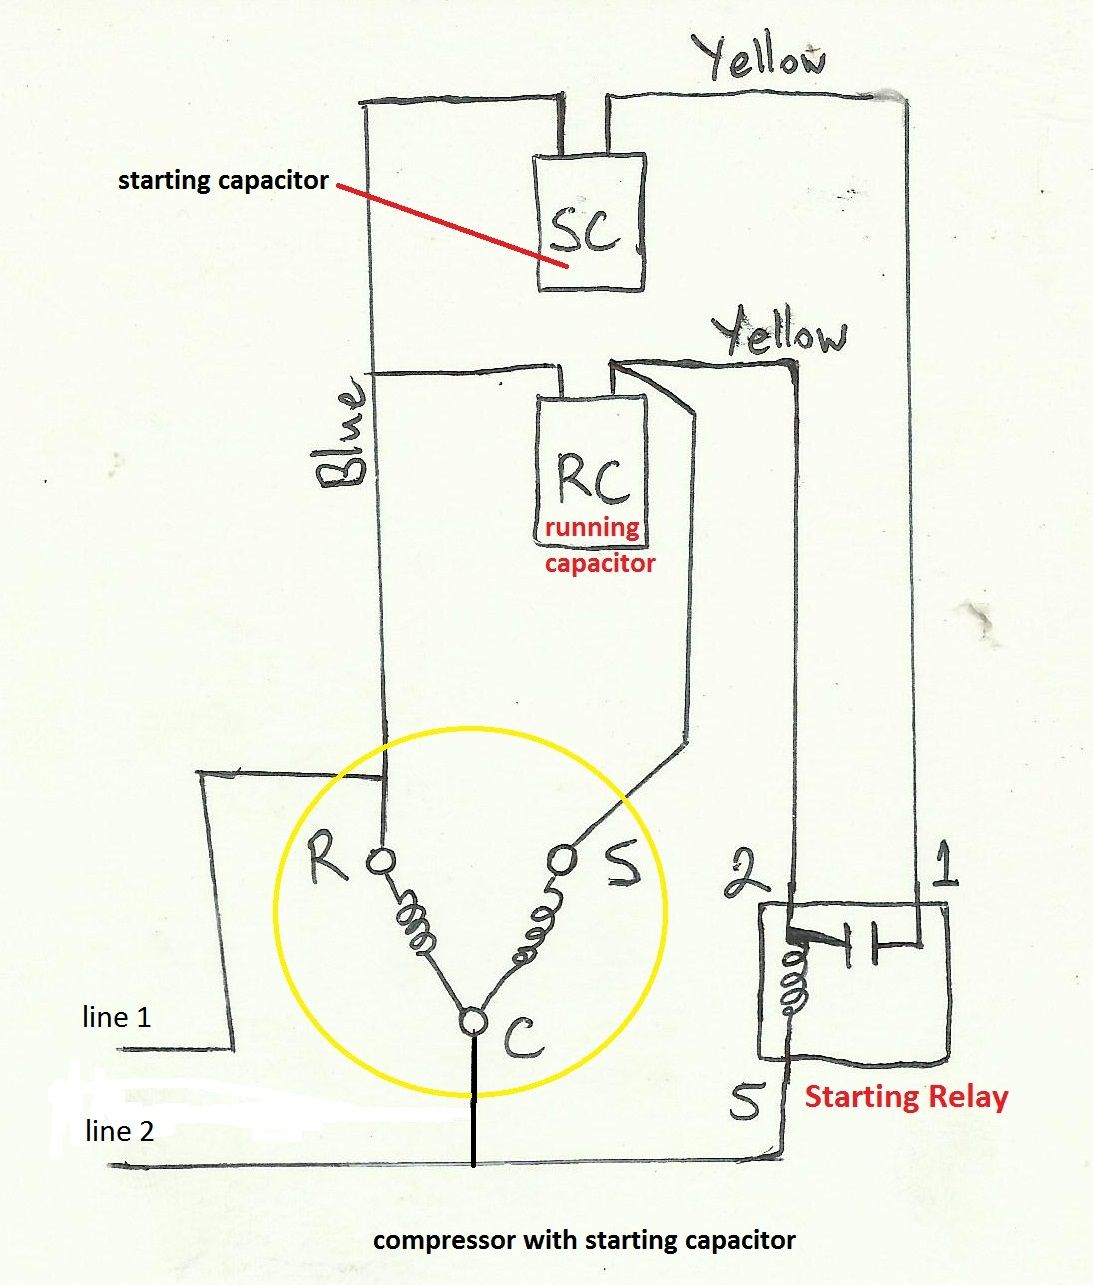 Capacitors For Compressor Wiring Diagram - Wiring Diagram Explained - Compressor Wiring Diagram Single Phase